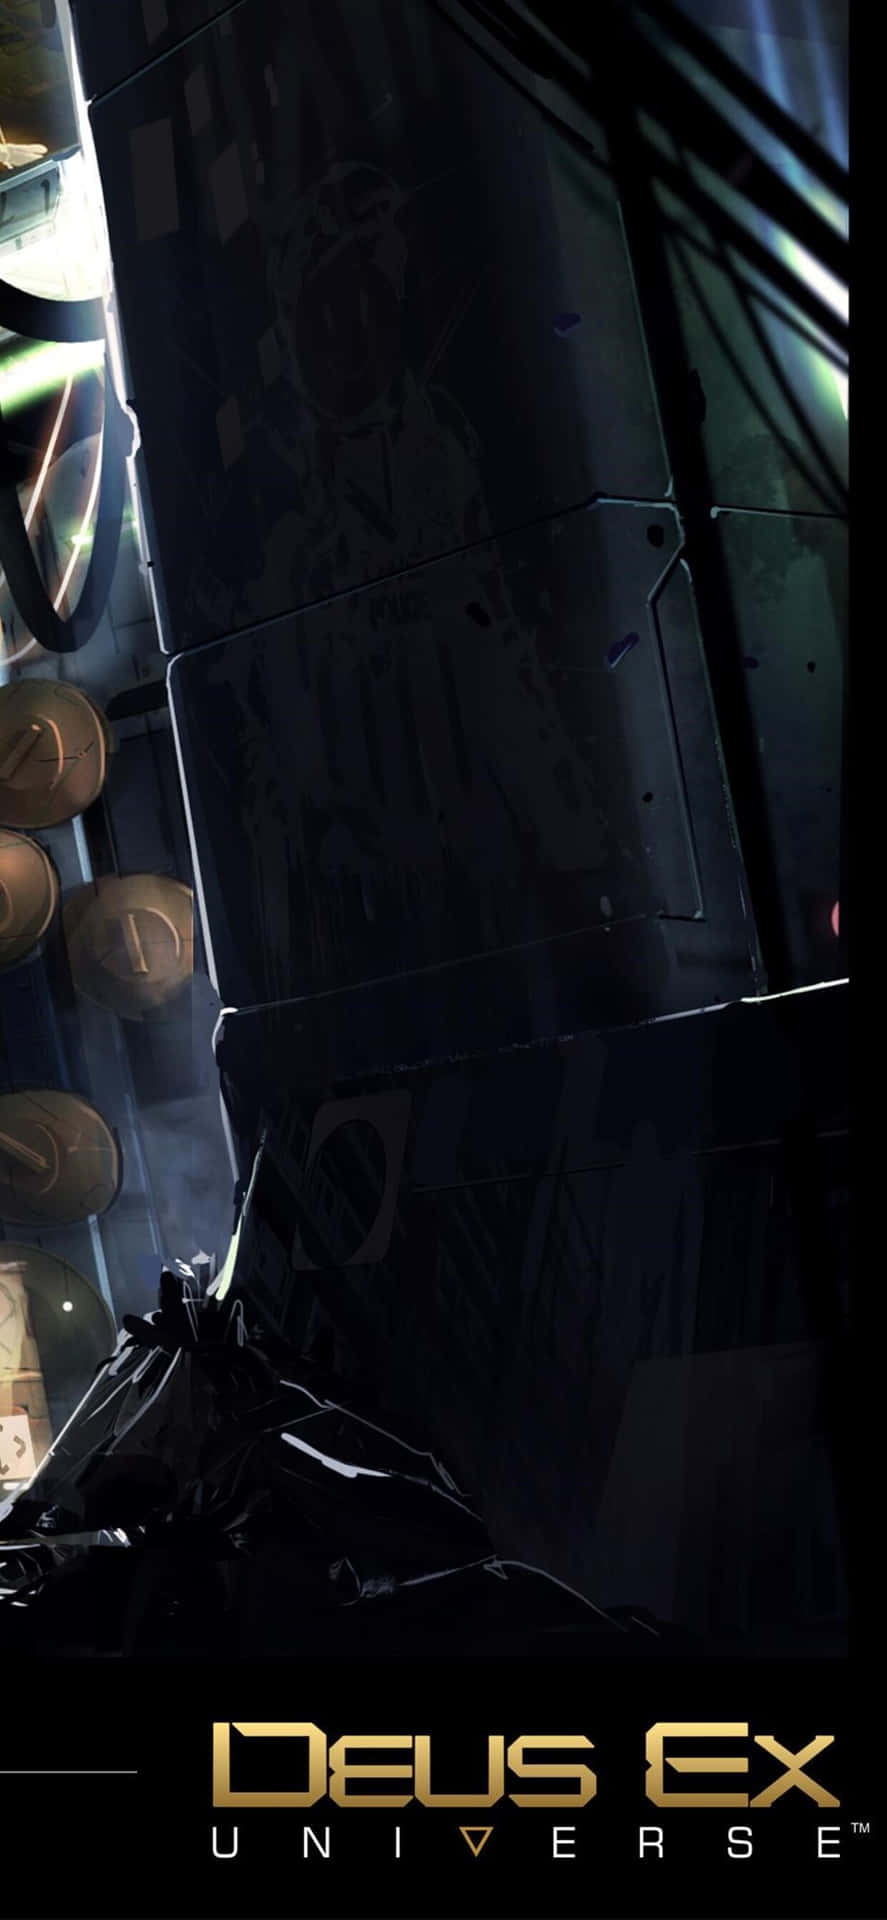 Android Deus Ex Mankind Divided: The Fight for Human Rights Continues